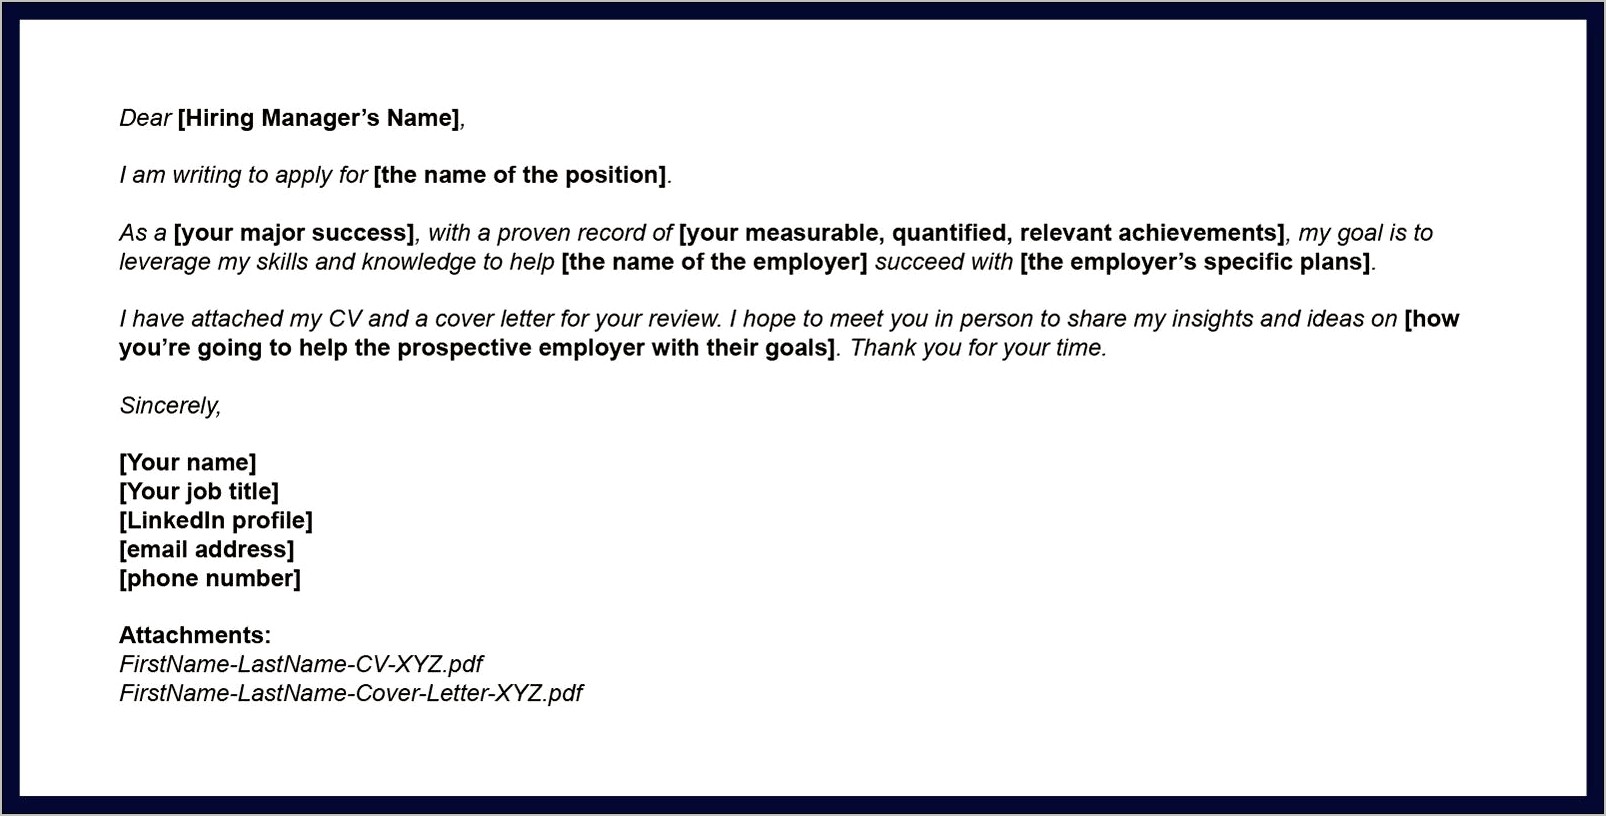 Sample Resume Email Message To A Company